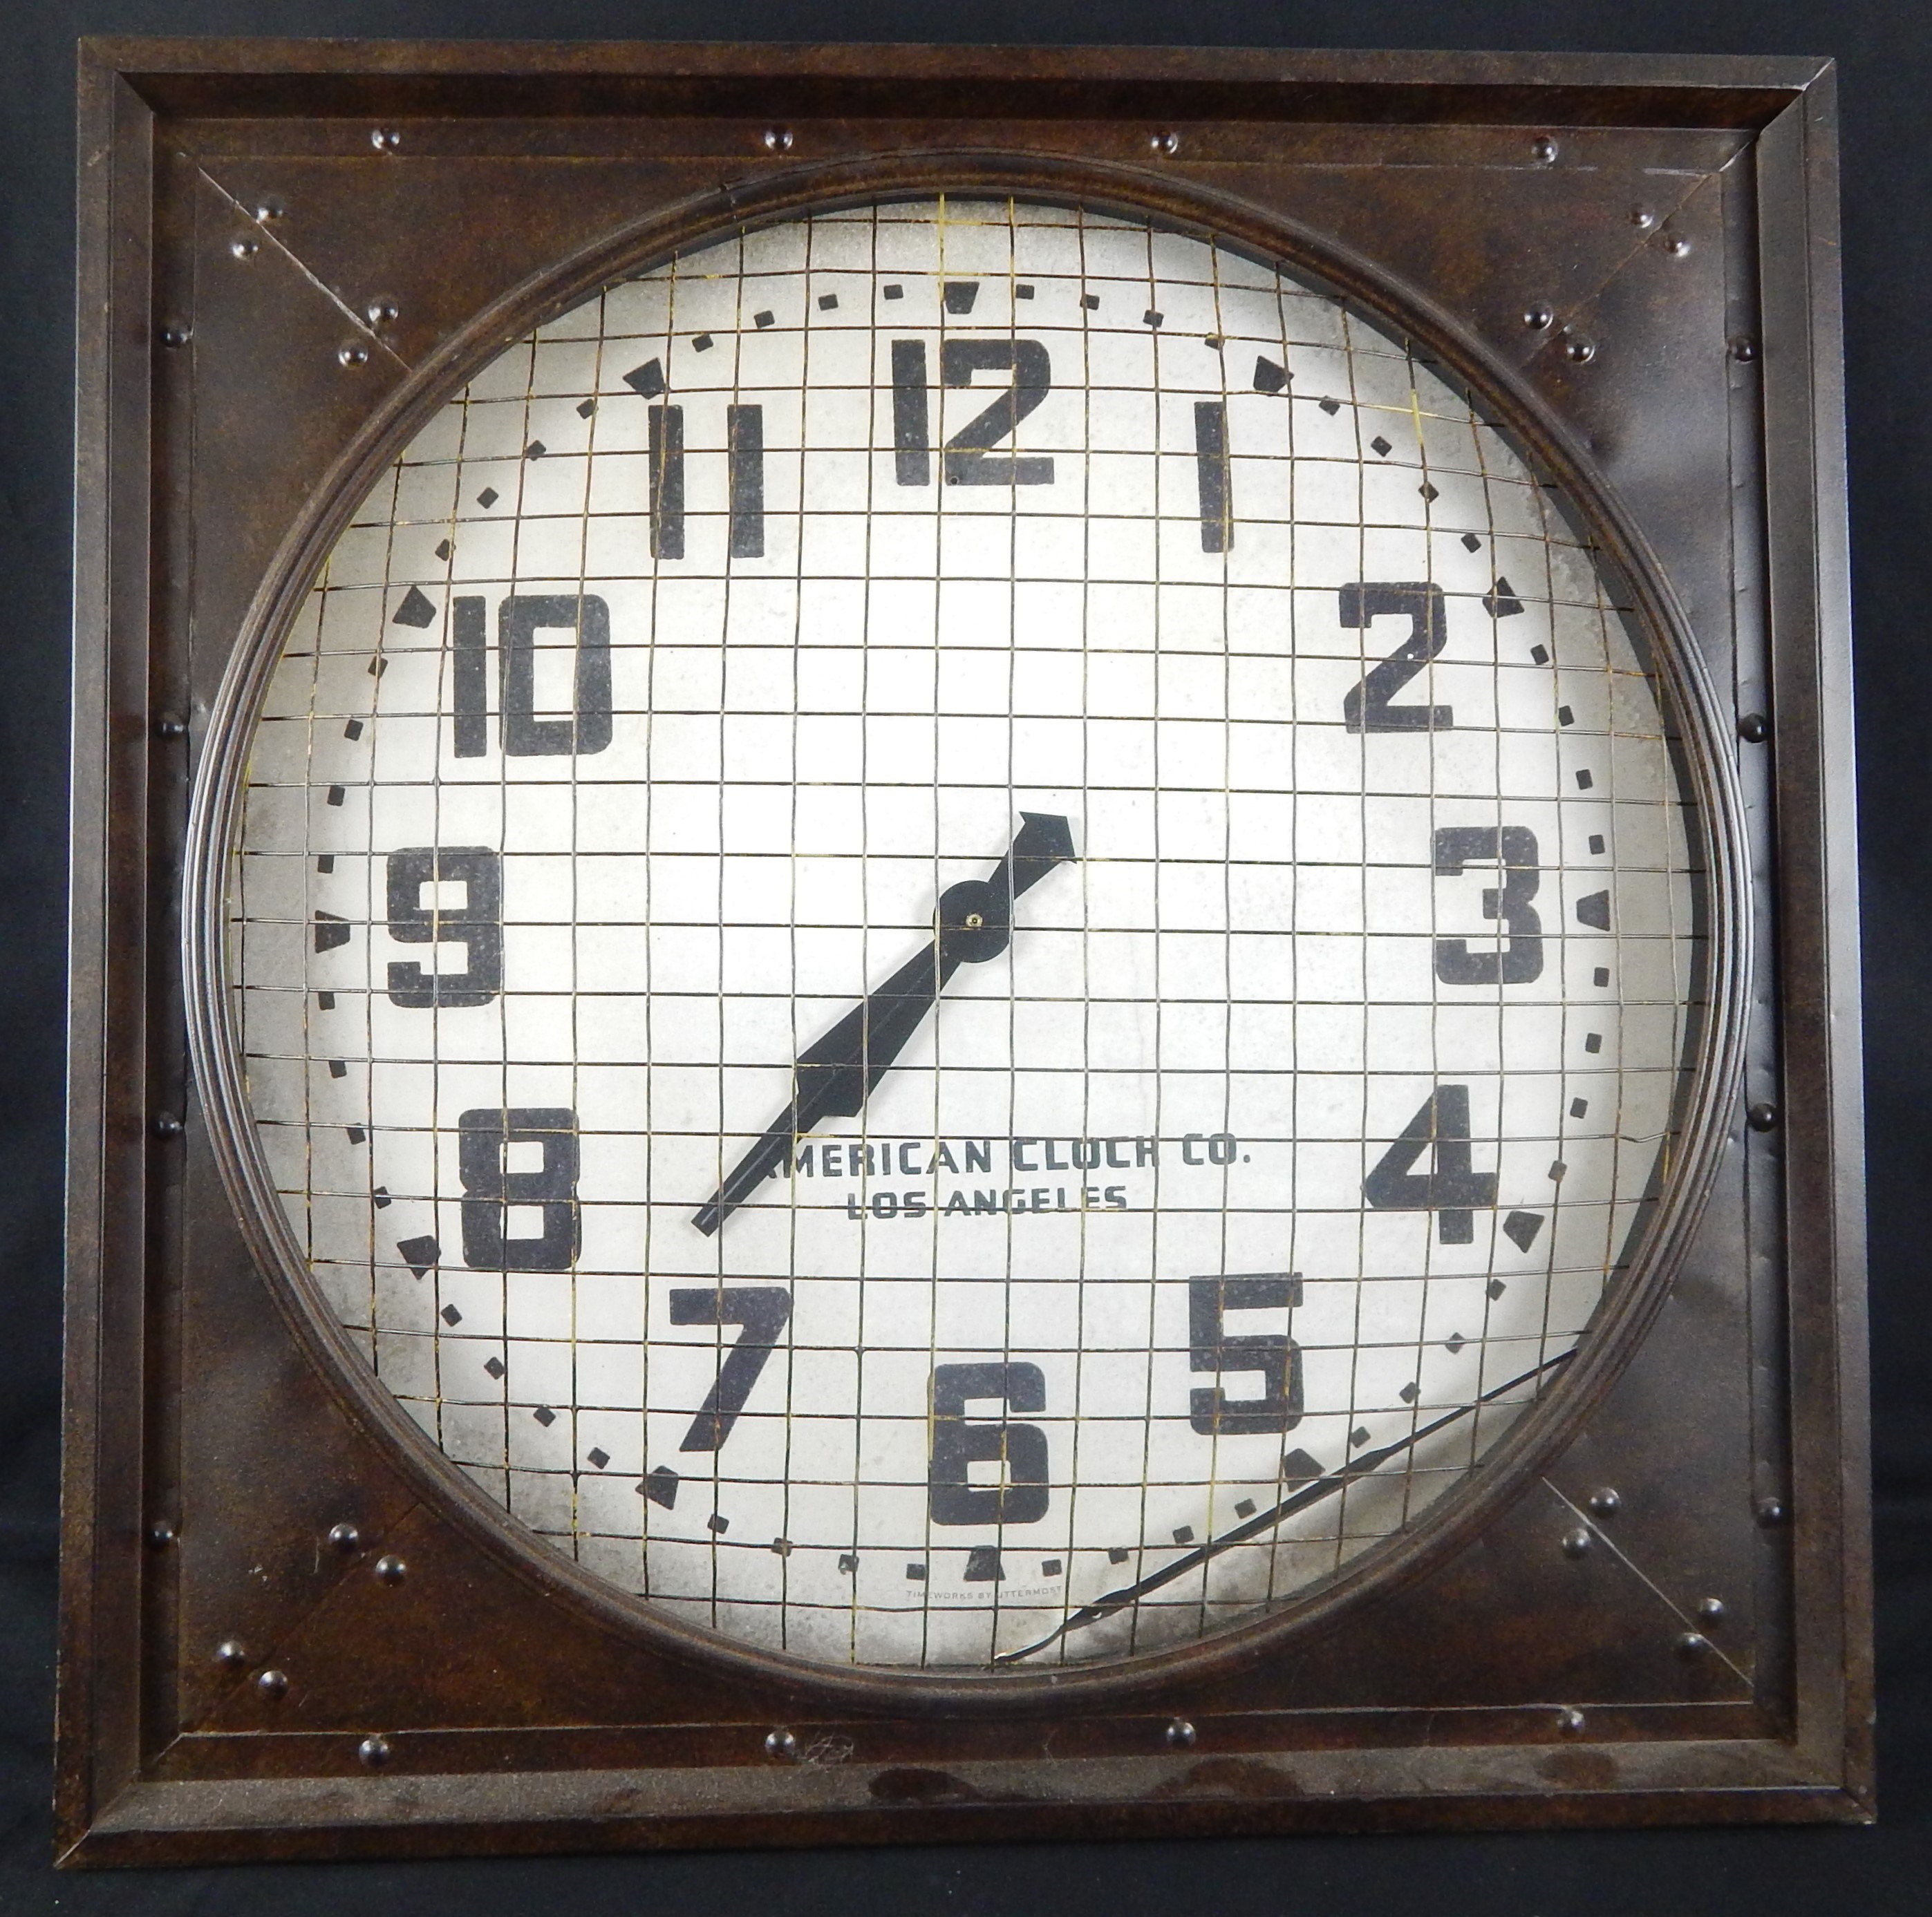 - 1930s Basketball Gymnasium Clock By American Clock Co. (Perfect Reproduction)